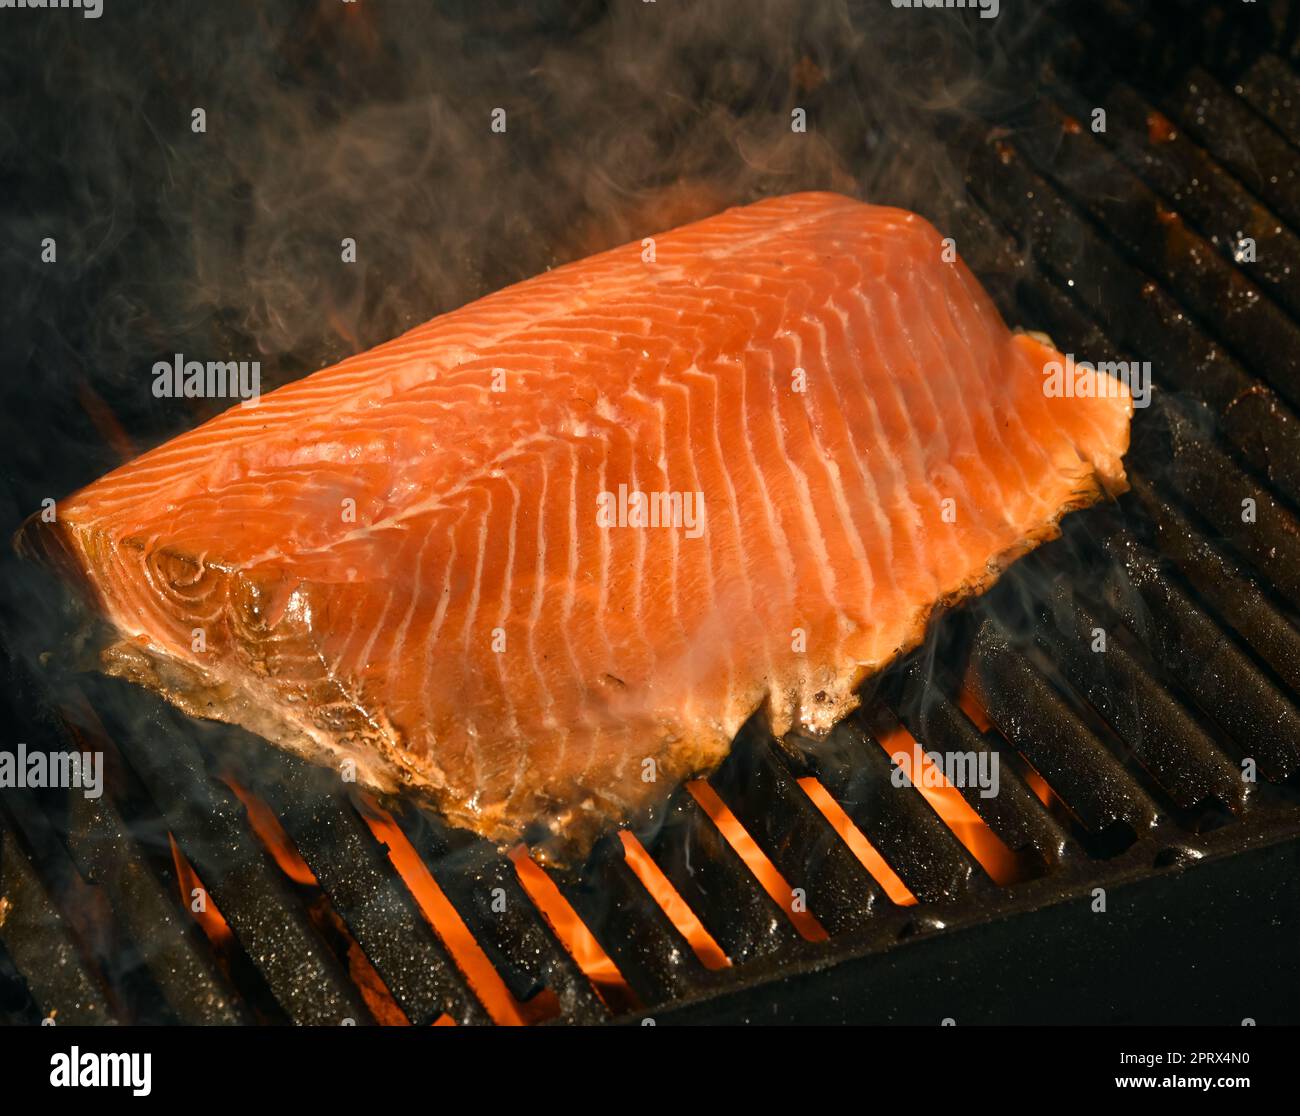 Searing and smoking salmon fish fillet on grill Stock Photo